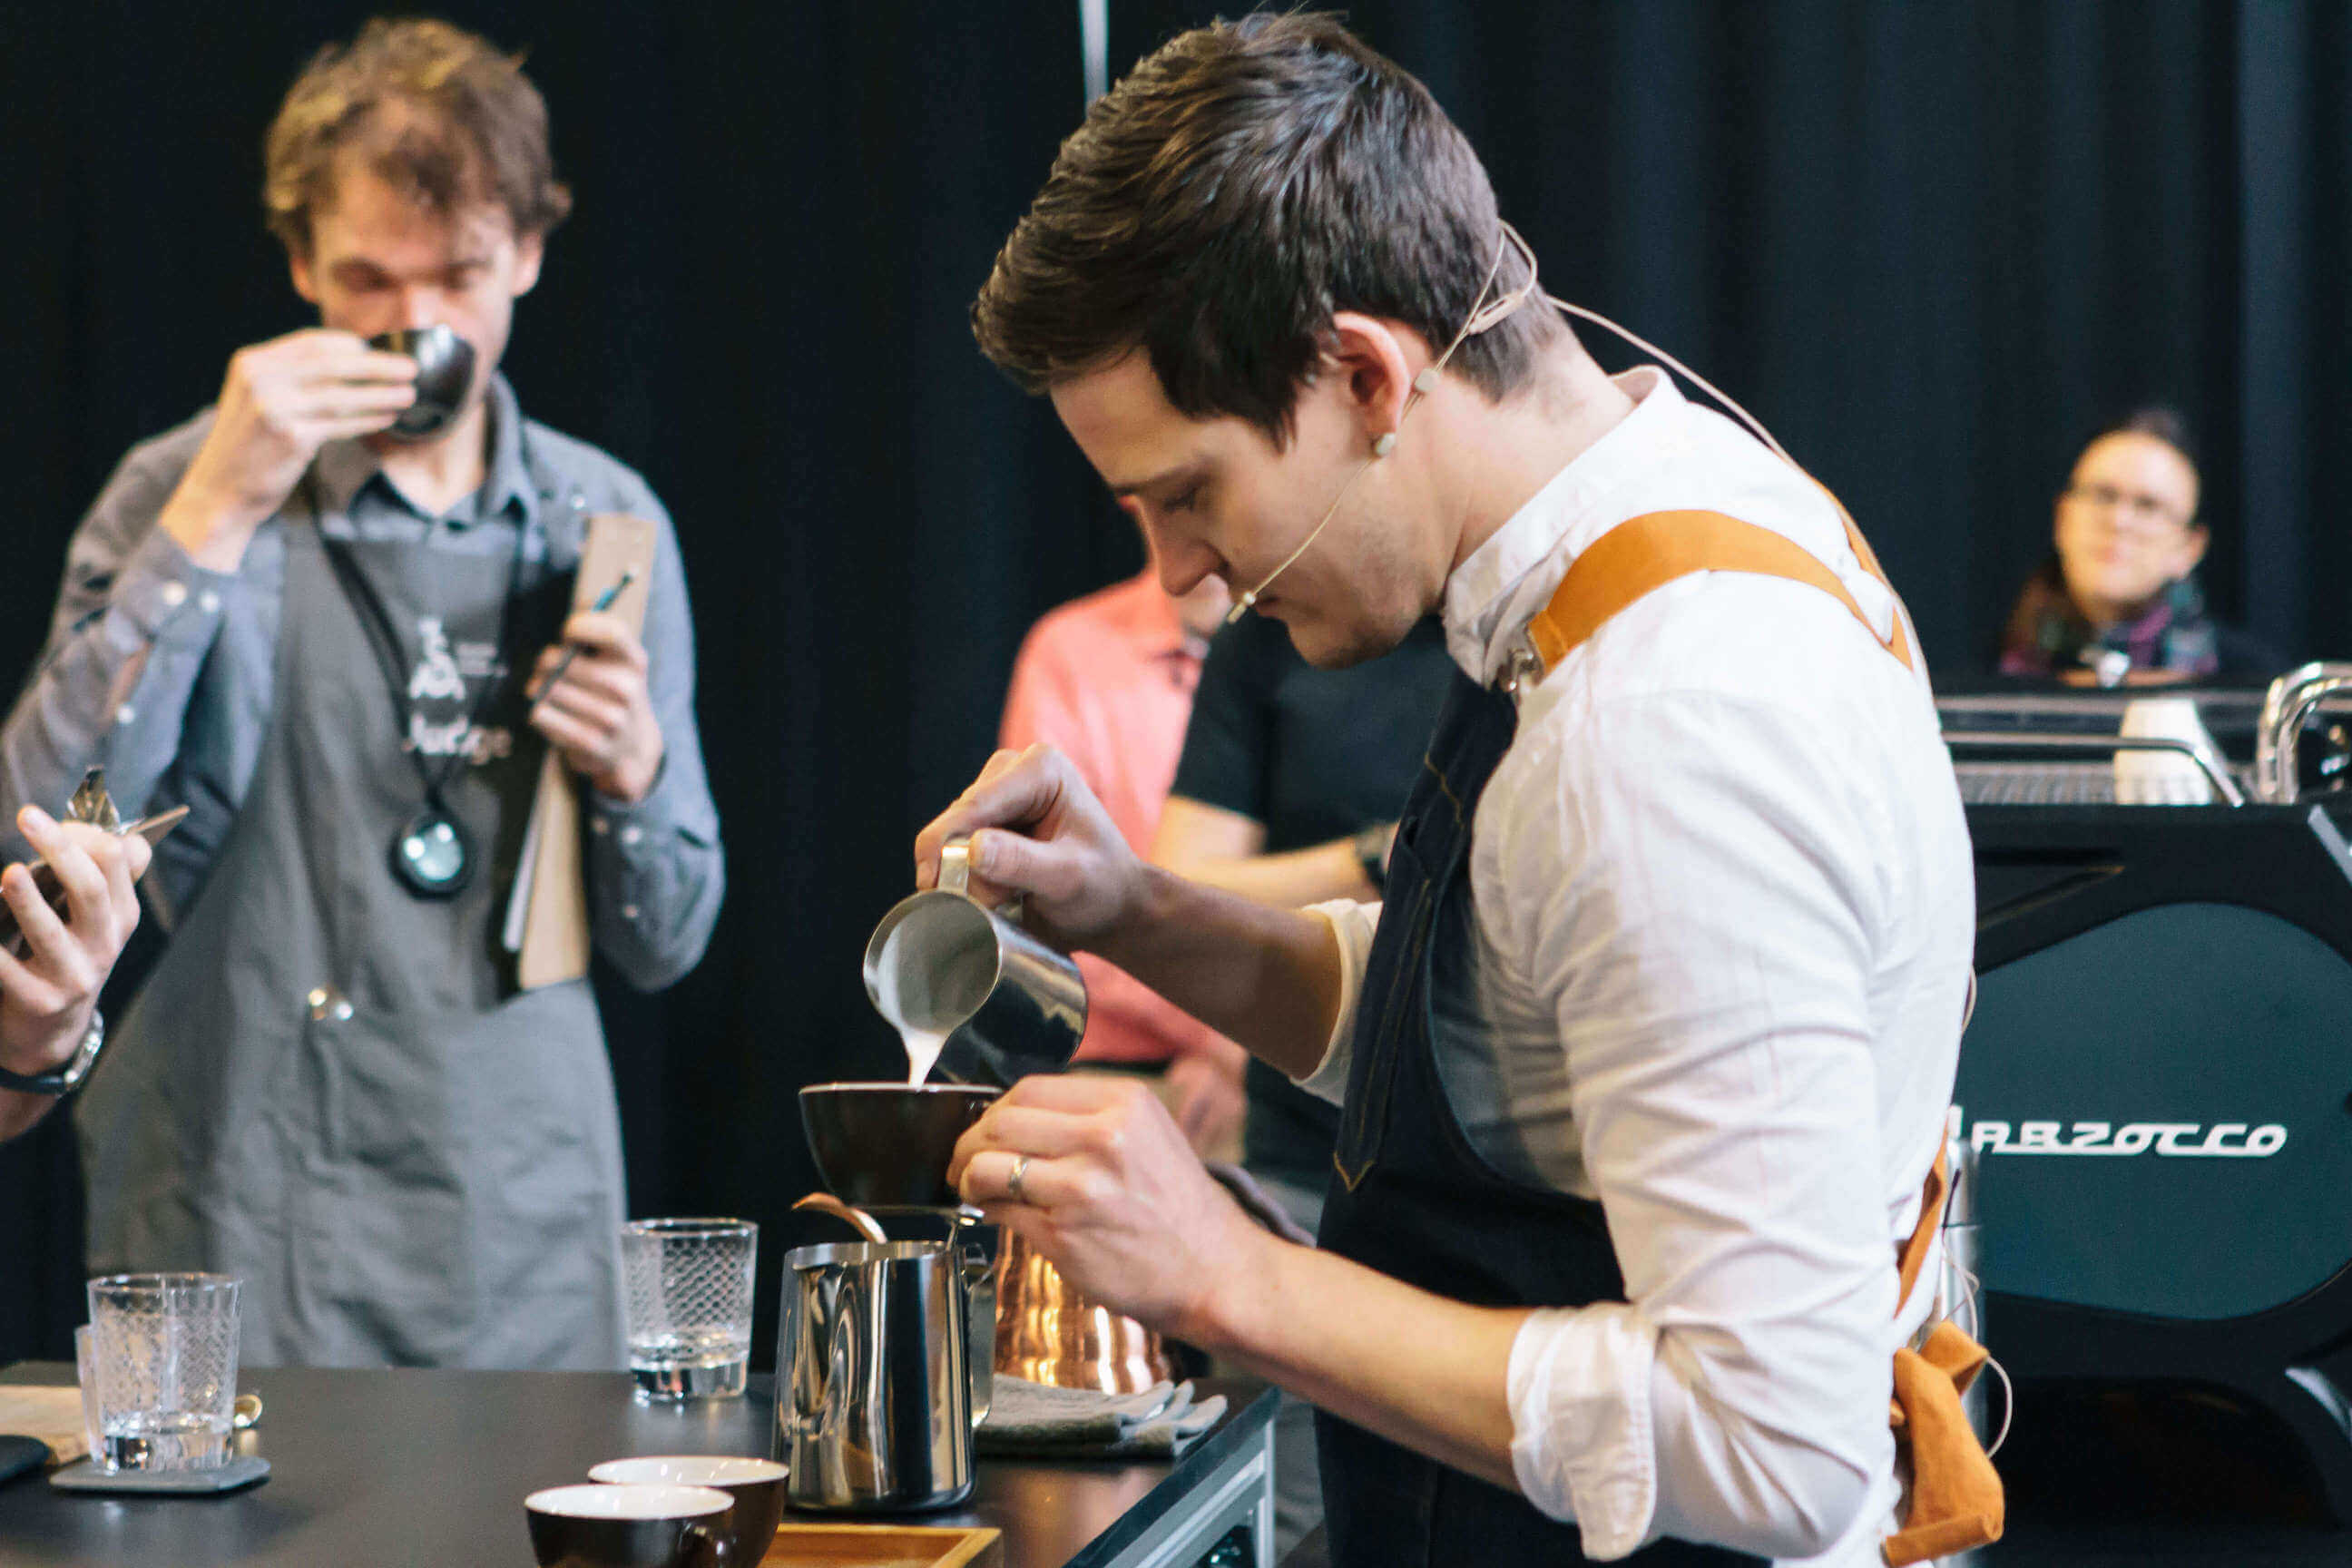 roasters/fire-and-flow/images/Callum%20UKBC%204.jpg